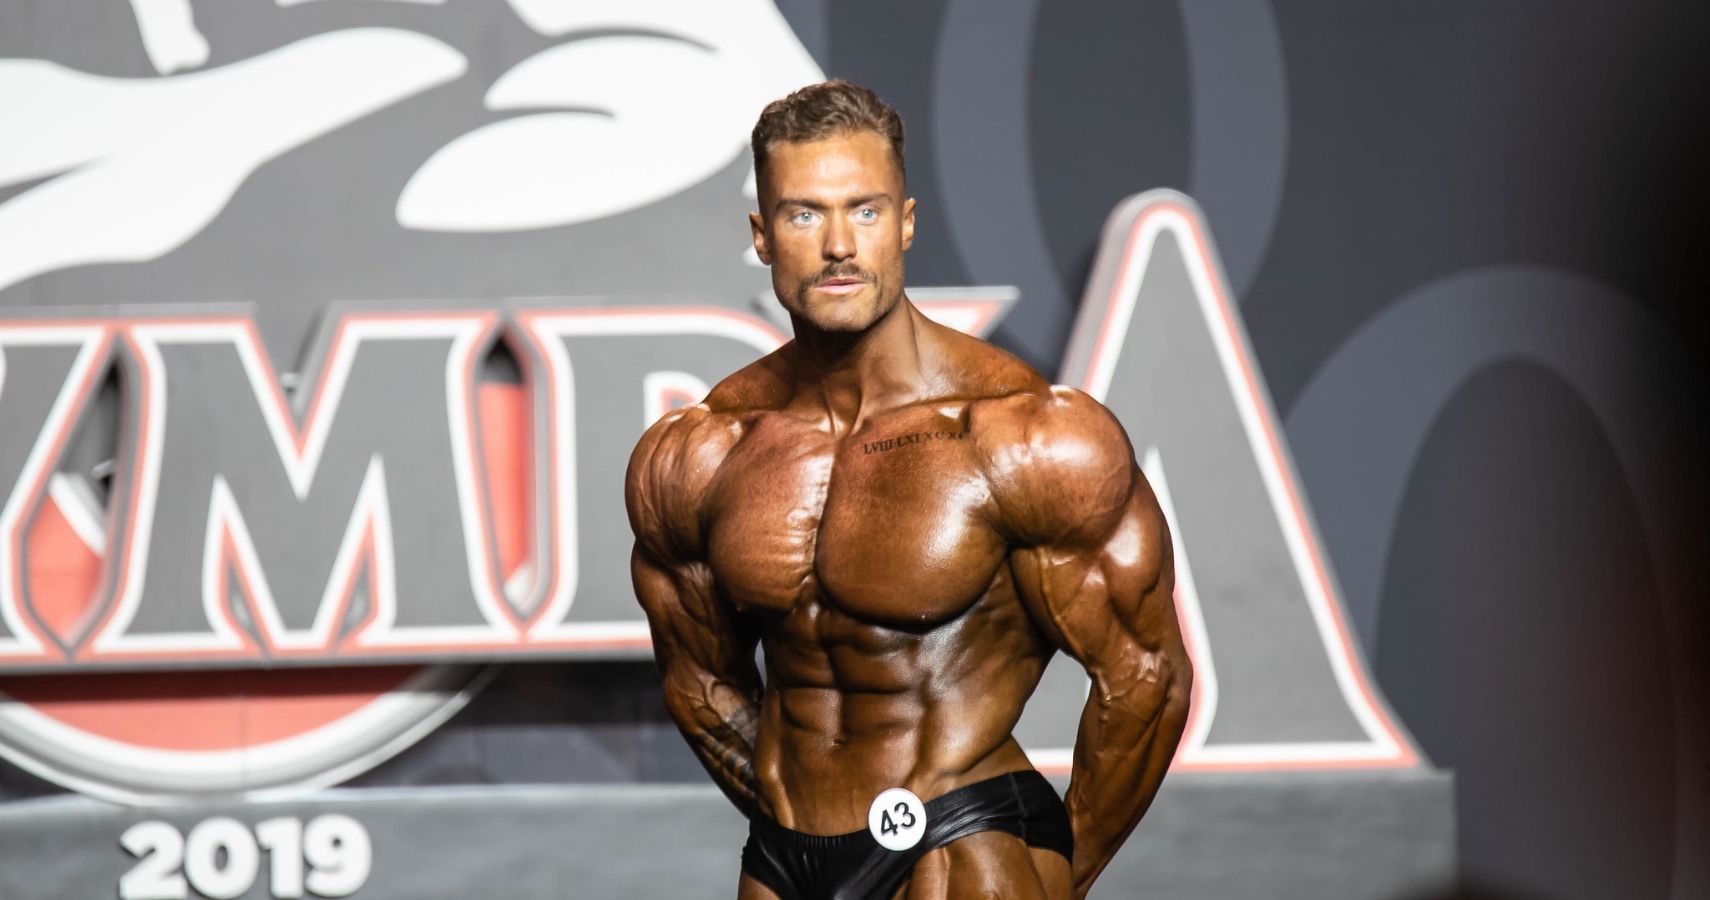 Becoming Mr. Olympia: How Chris Bumstead Made His Millions